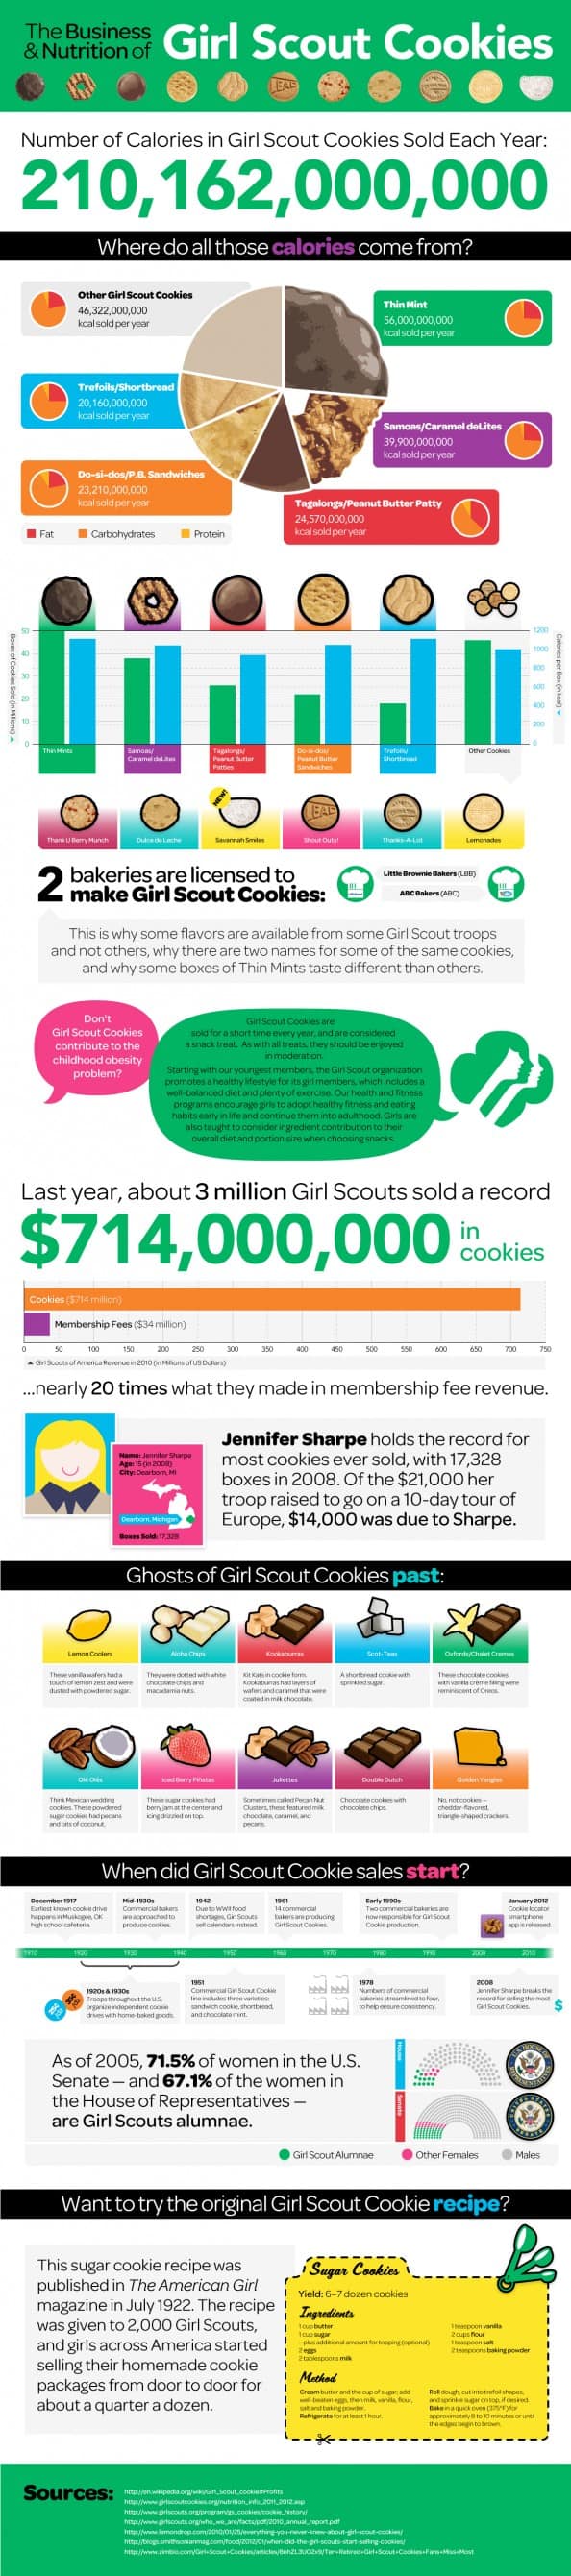 Business of Girl Scout Cookies